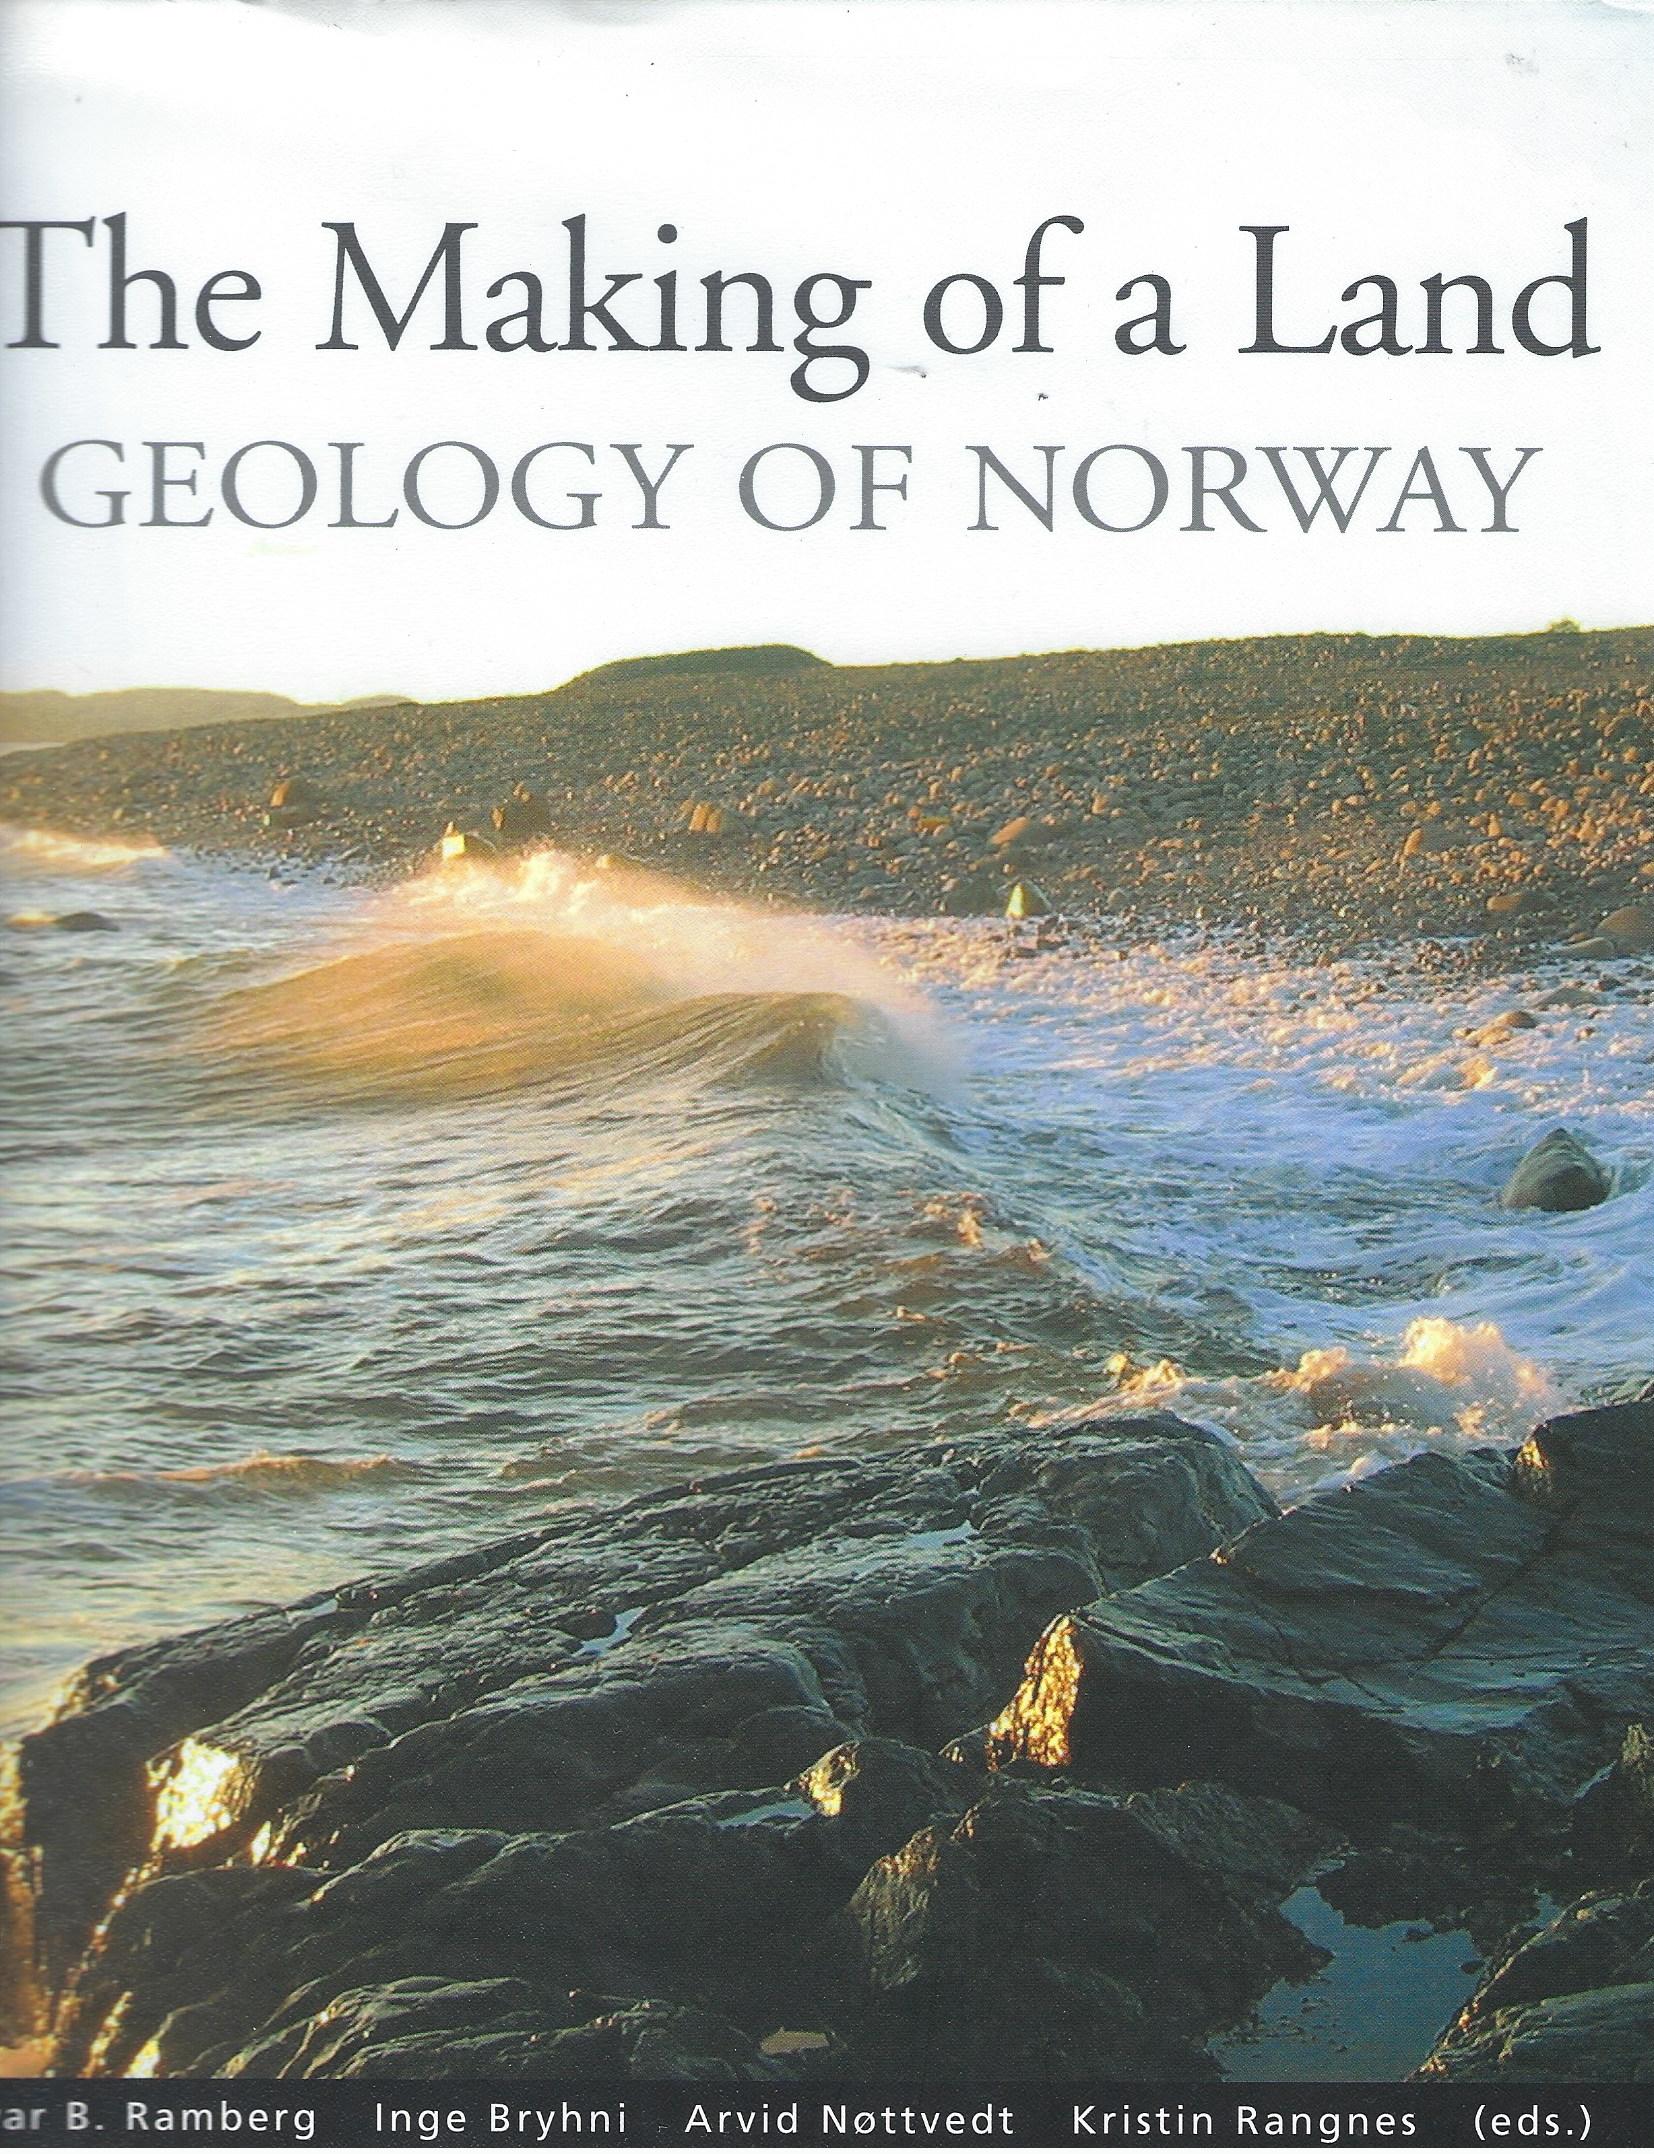 The Making of a Land - The Geology of Norway - I. B. Ramberg; I. Bryhni; A. Nottvedt; K. Rangnes